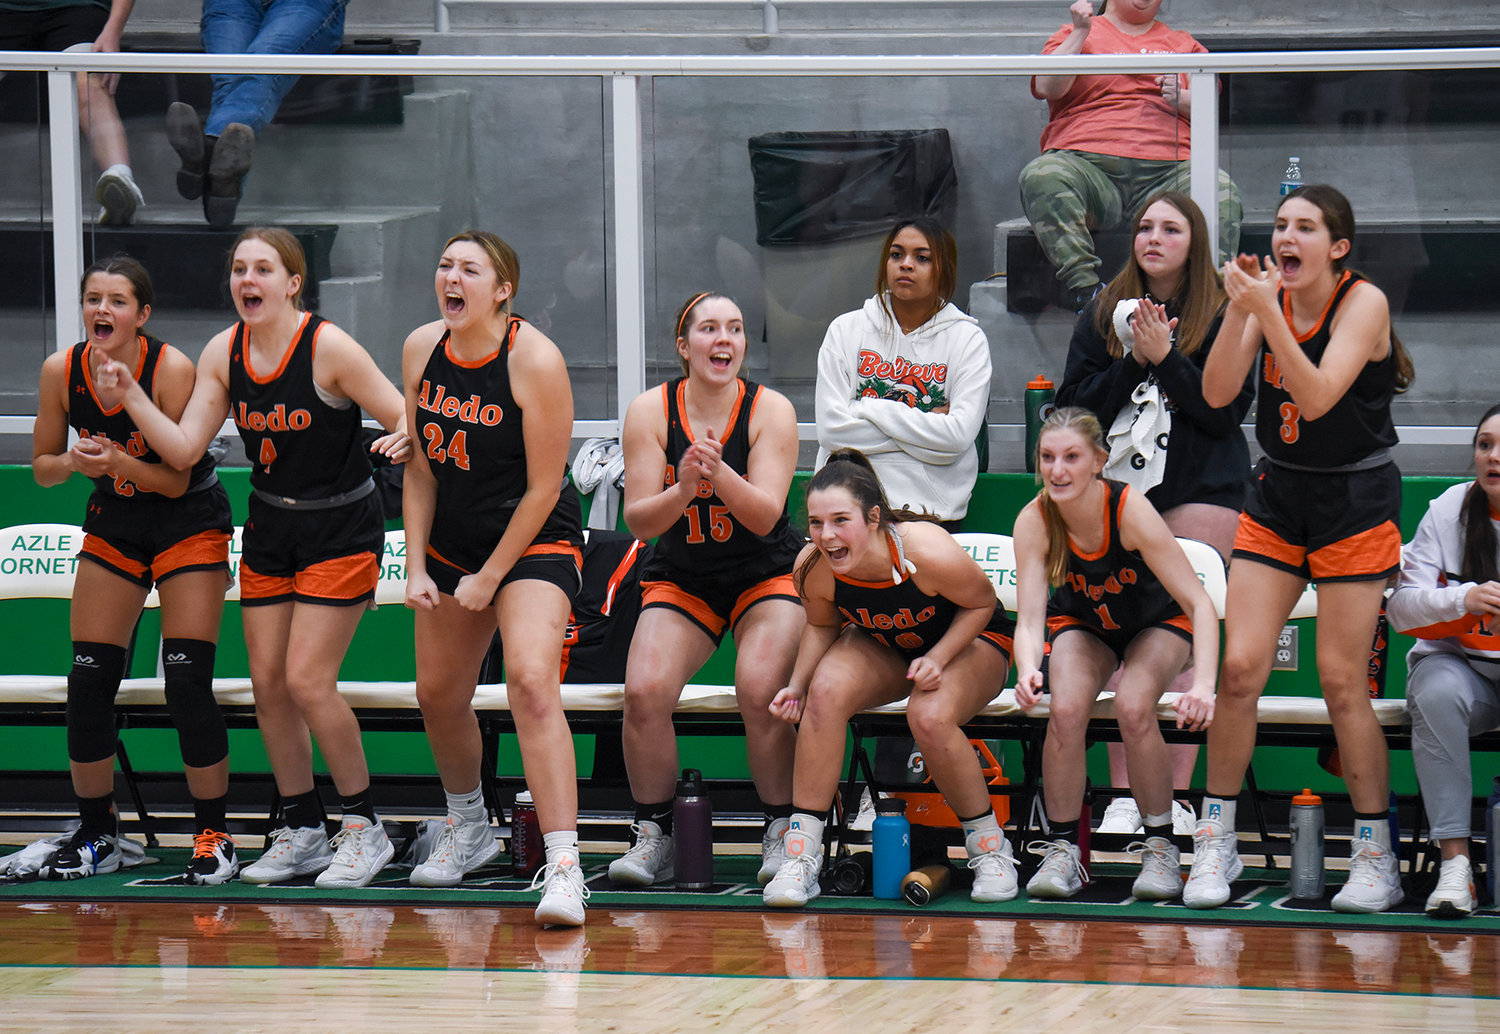 The Ladycats varsity basketballtTeam cheered with excitment when the team tied Azle 36-36 in the fourth quarter of their home game on Tuesday, Jan. 10.. The Ladycats went on to win the game 47-38.